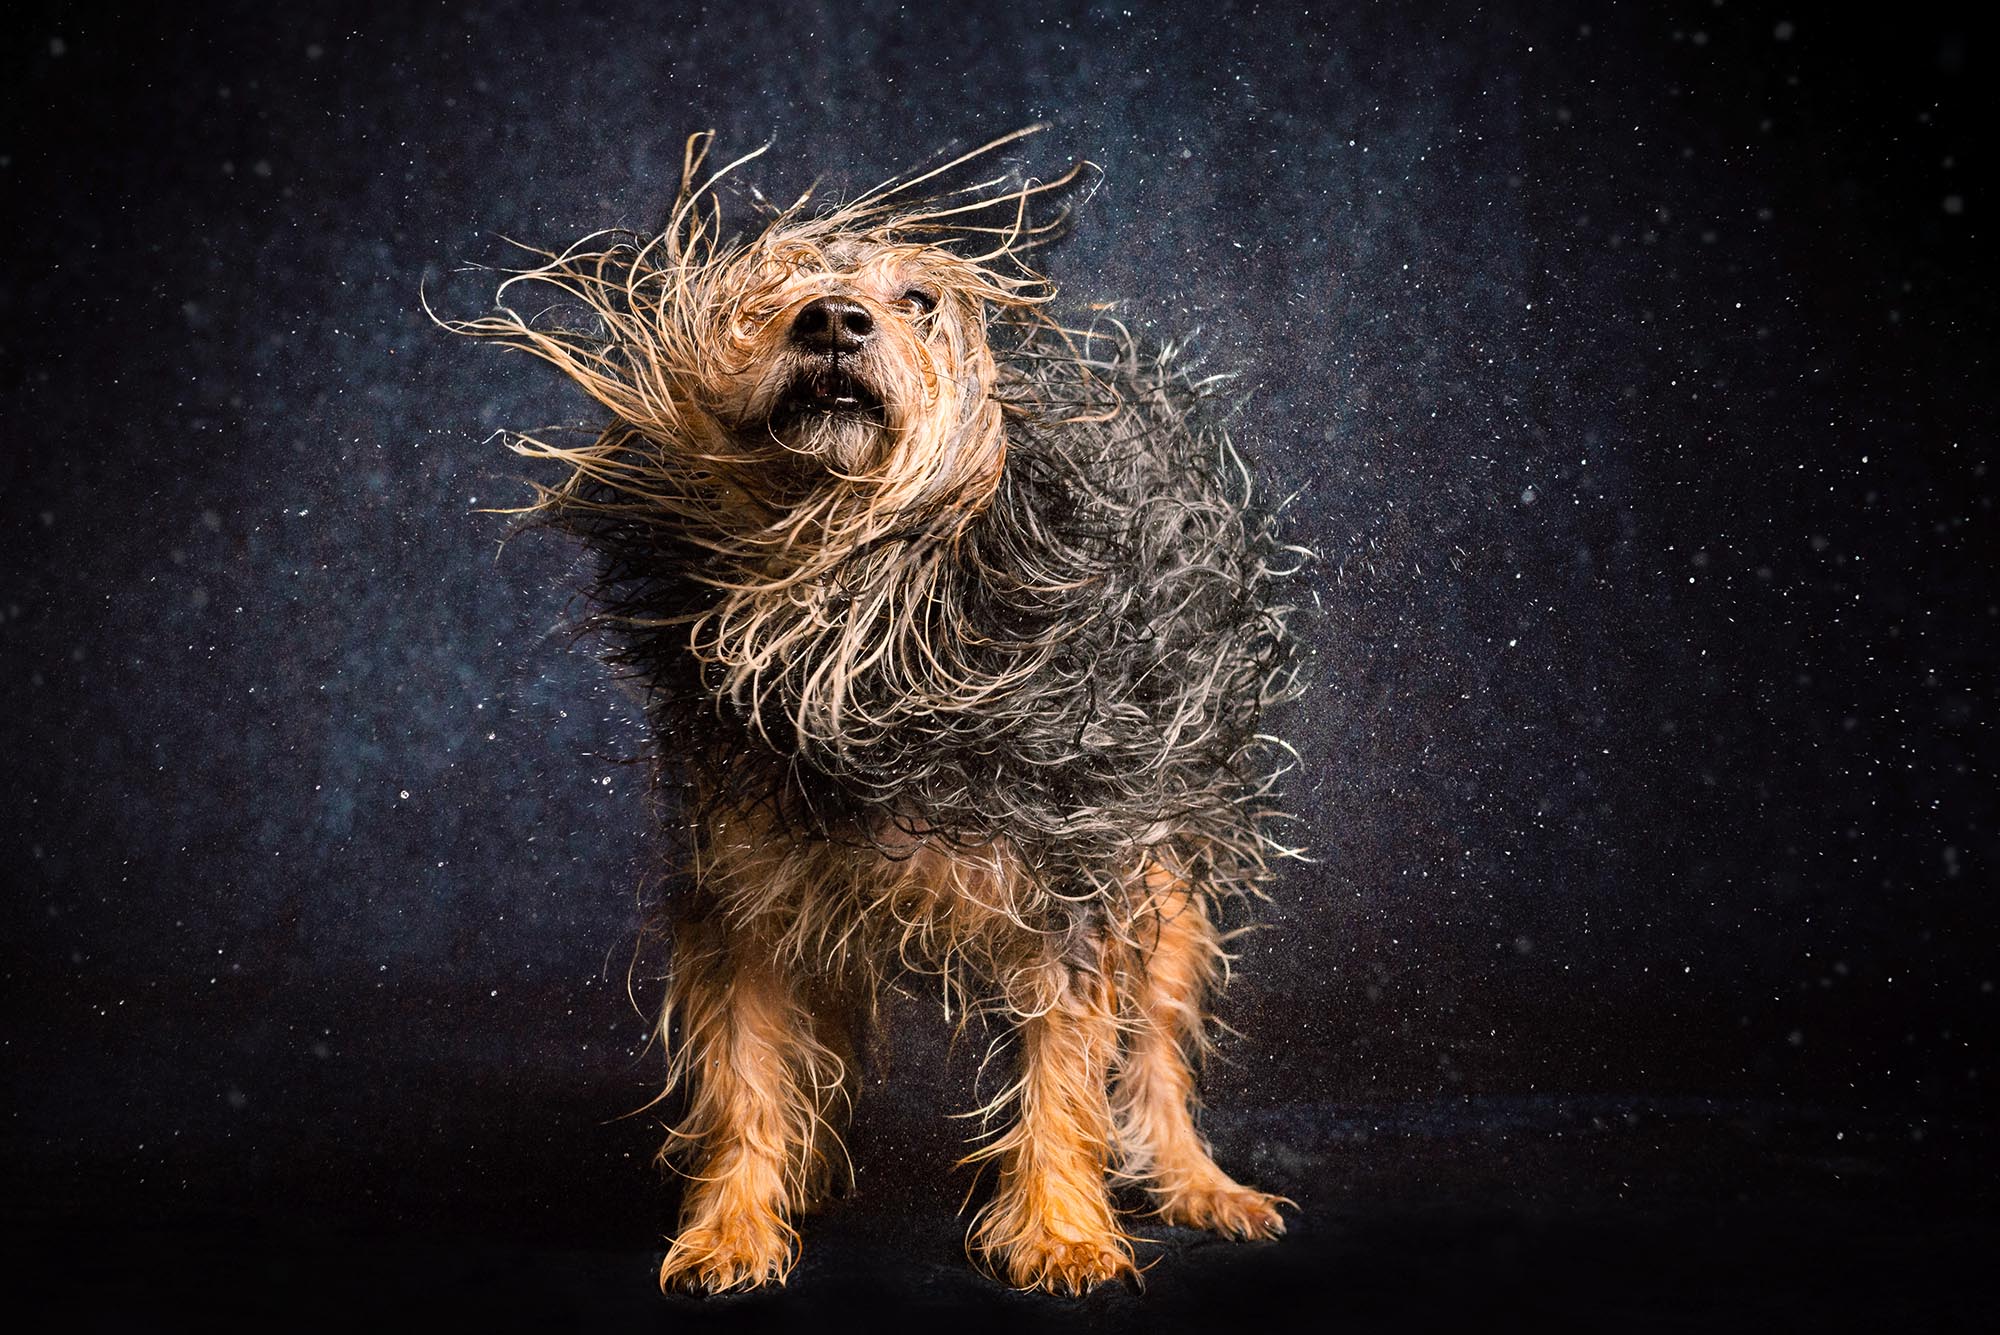 Dog shakes off water by Candice Cusic